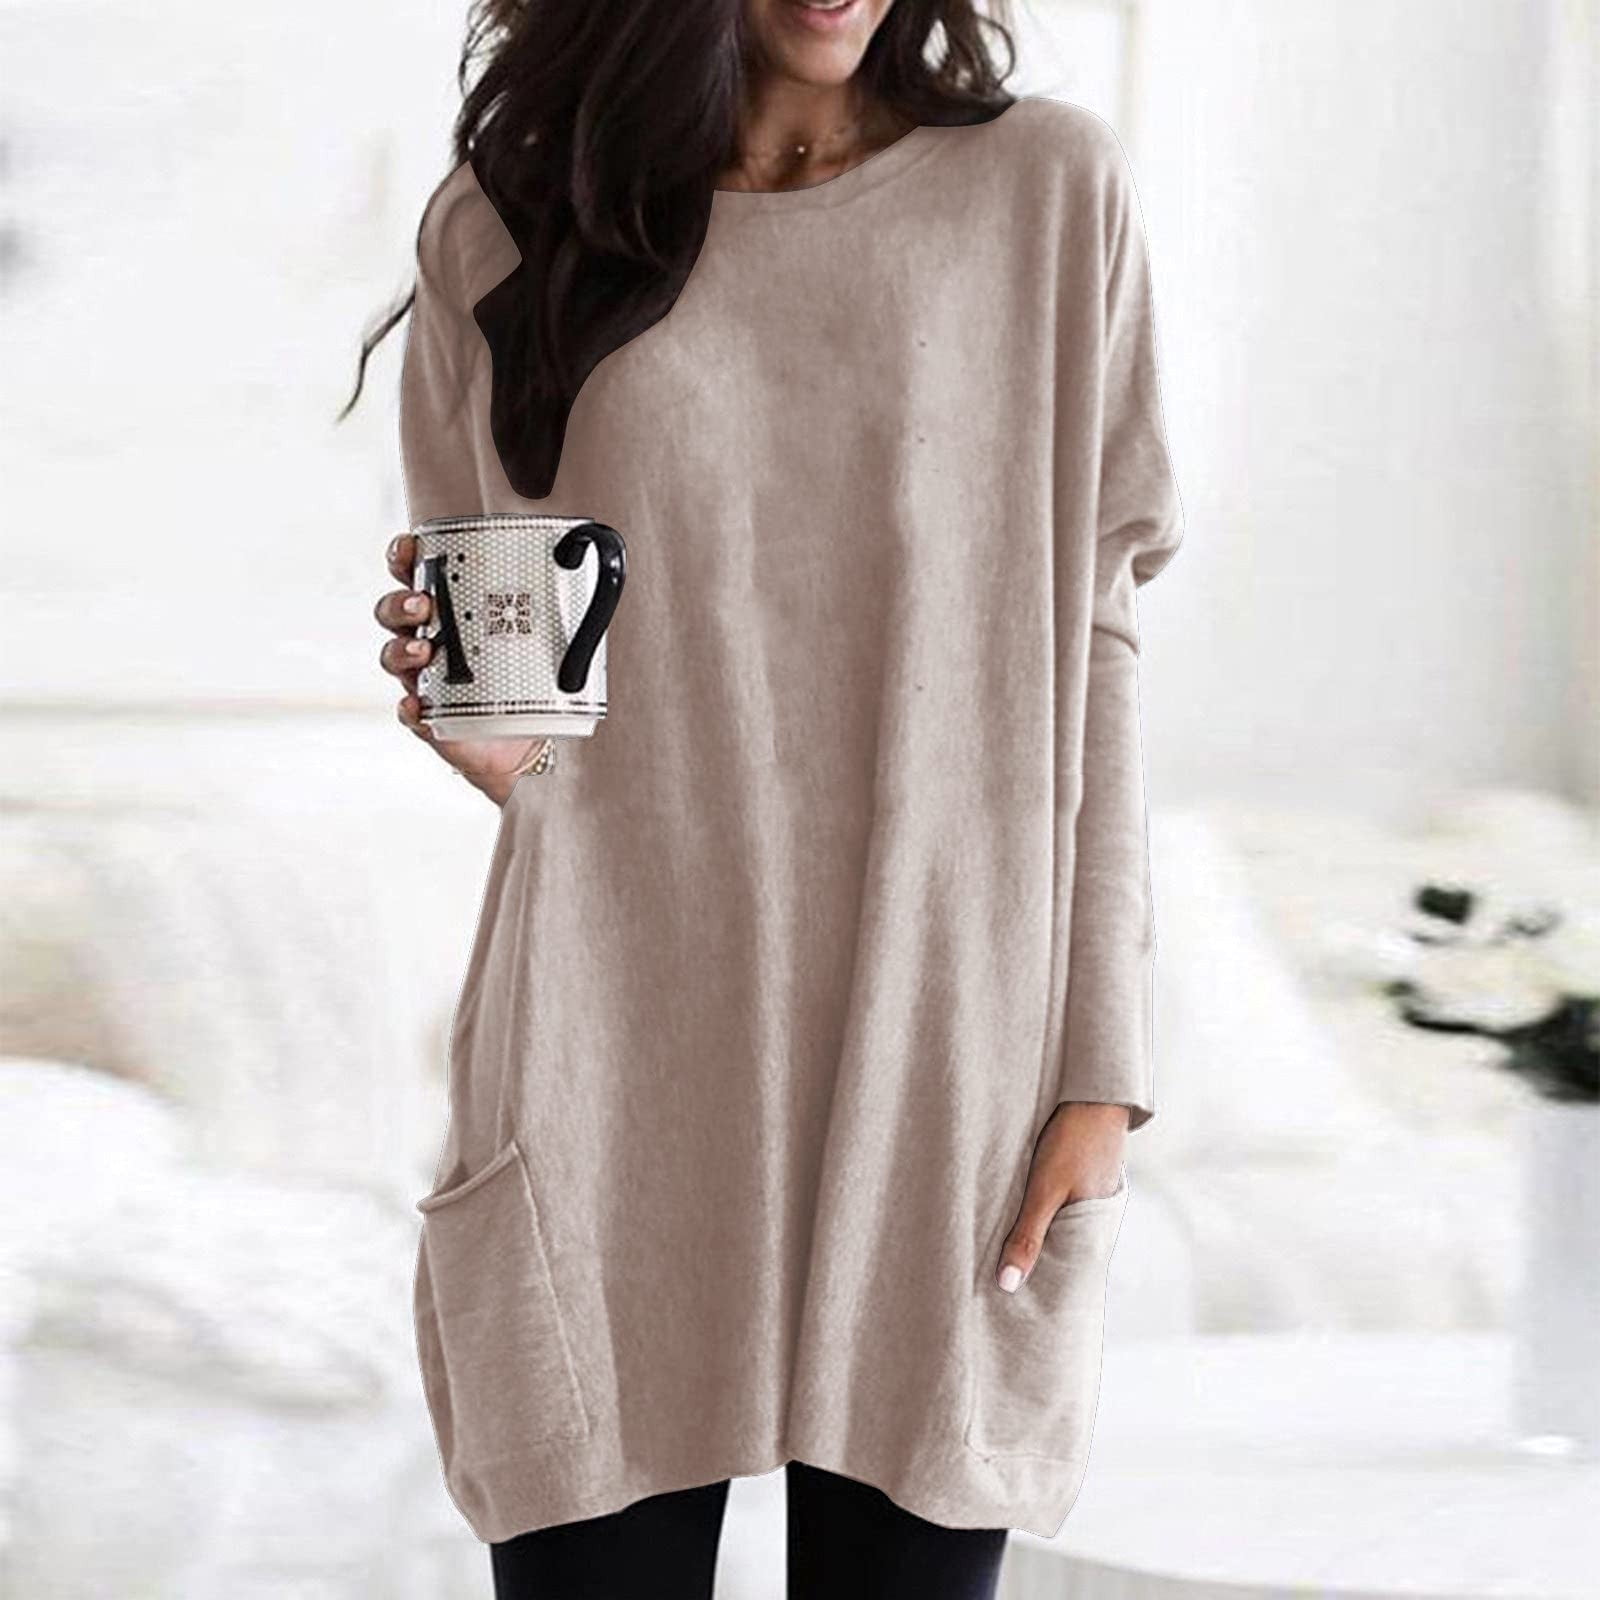 Tunic Tops to Wear with Leggings Round Neck Feather Graphic Comfy Flowy  Hide Belly Long Shirt Long Sleeve Shirts Dressy Plus Size Tops for Women  Beige